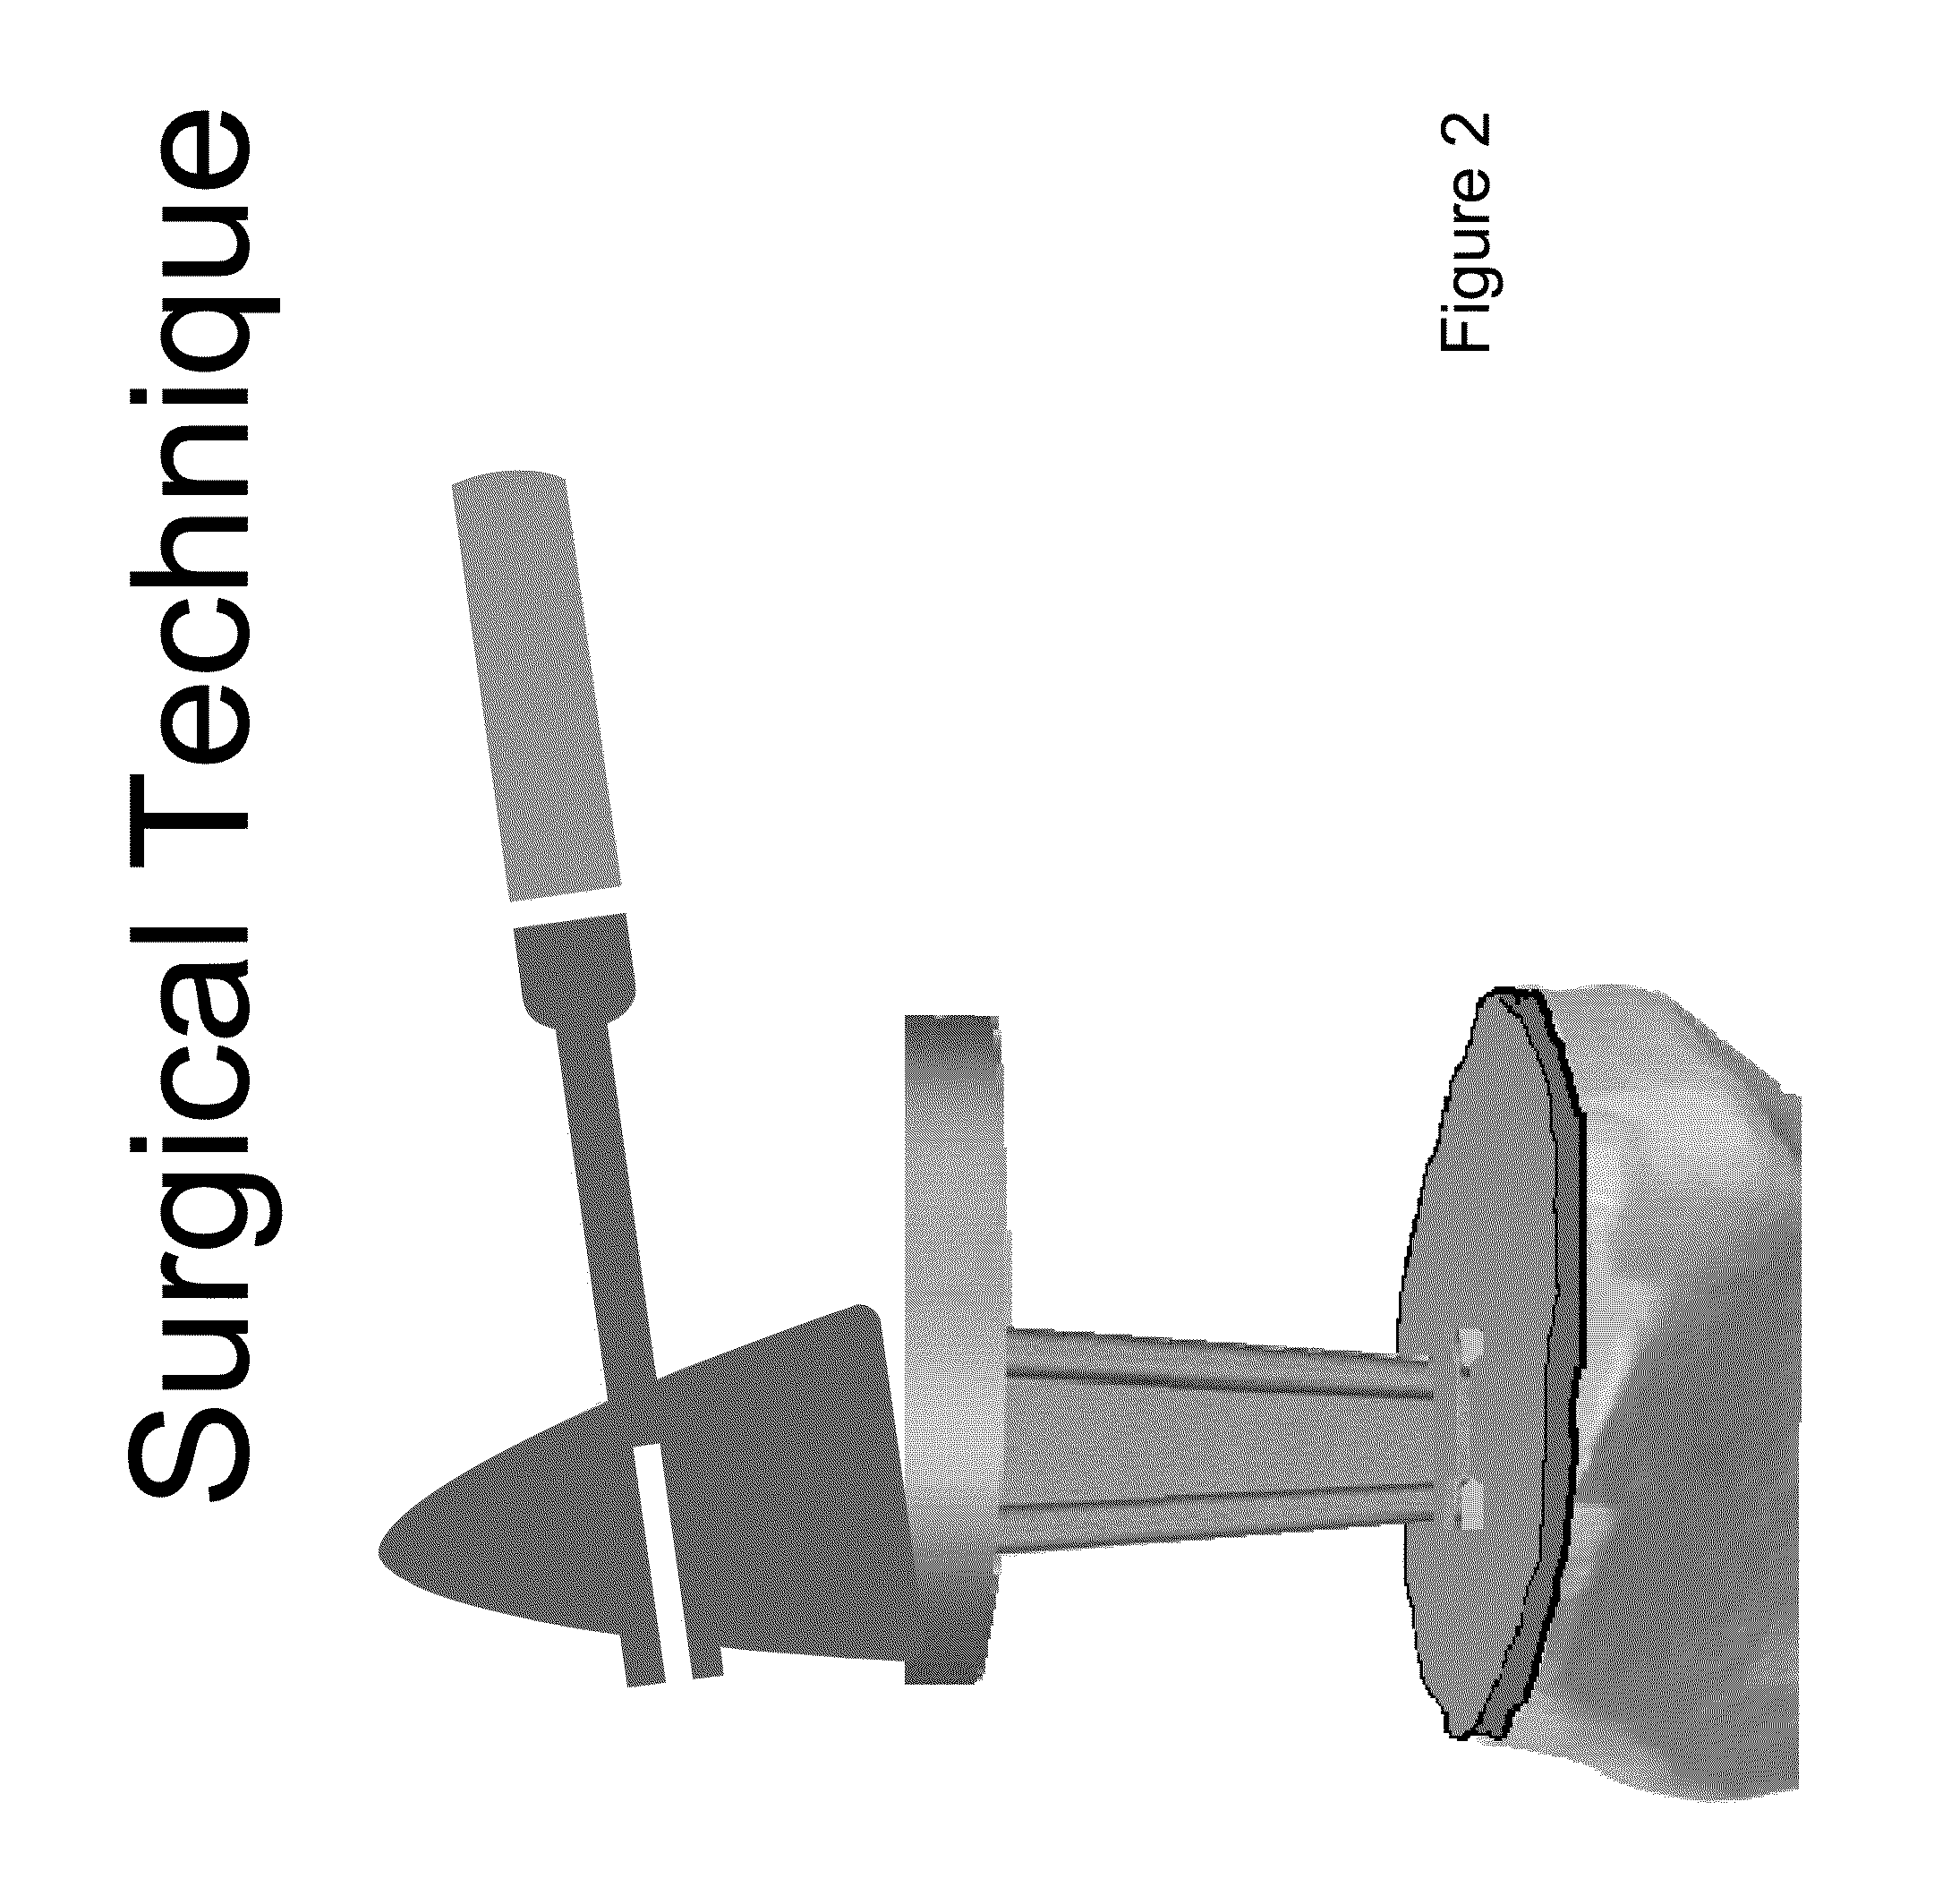 Method of delivering a biphosphonate and/or strontium ranelate below the surface of a bone